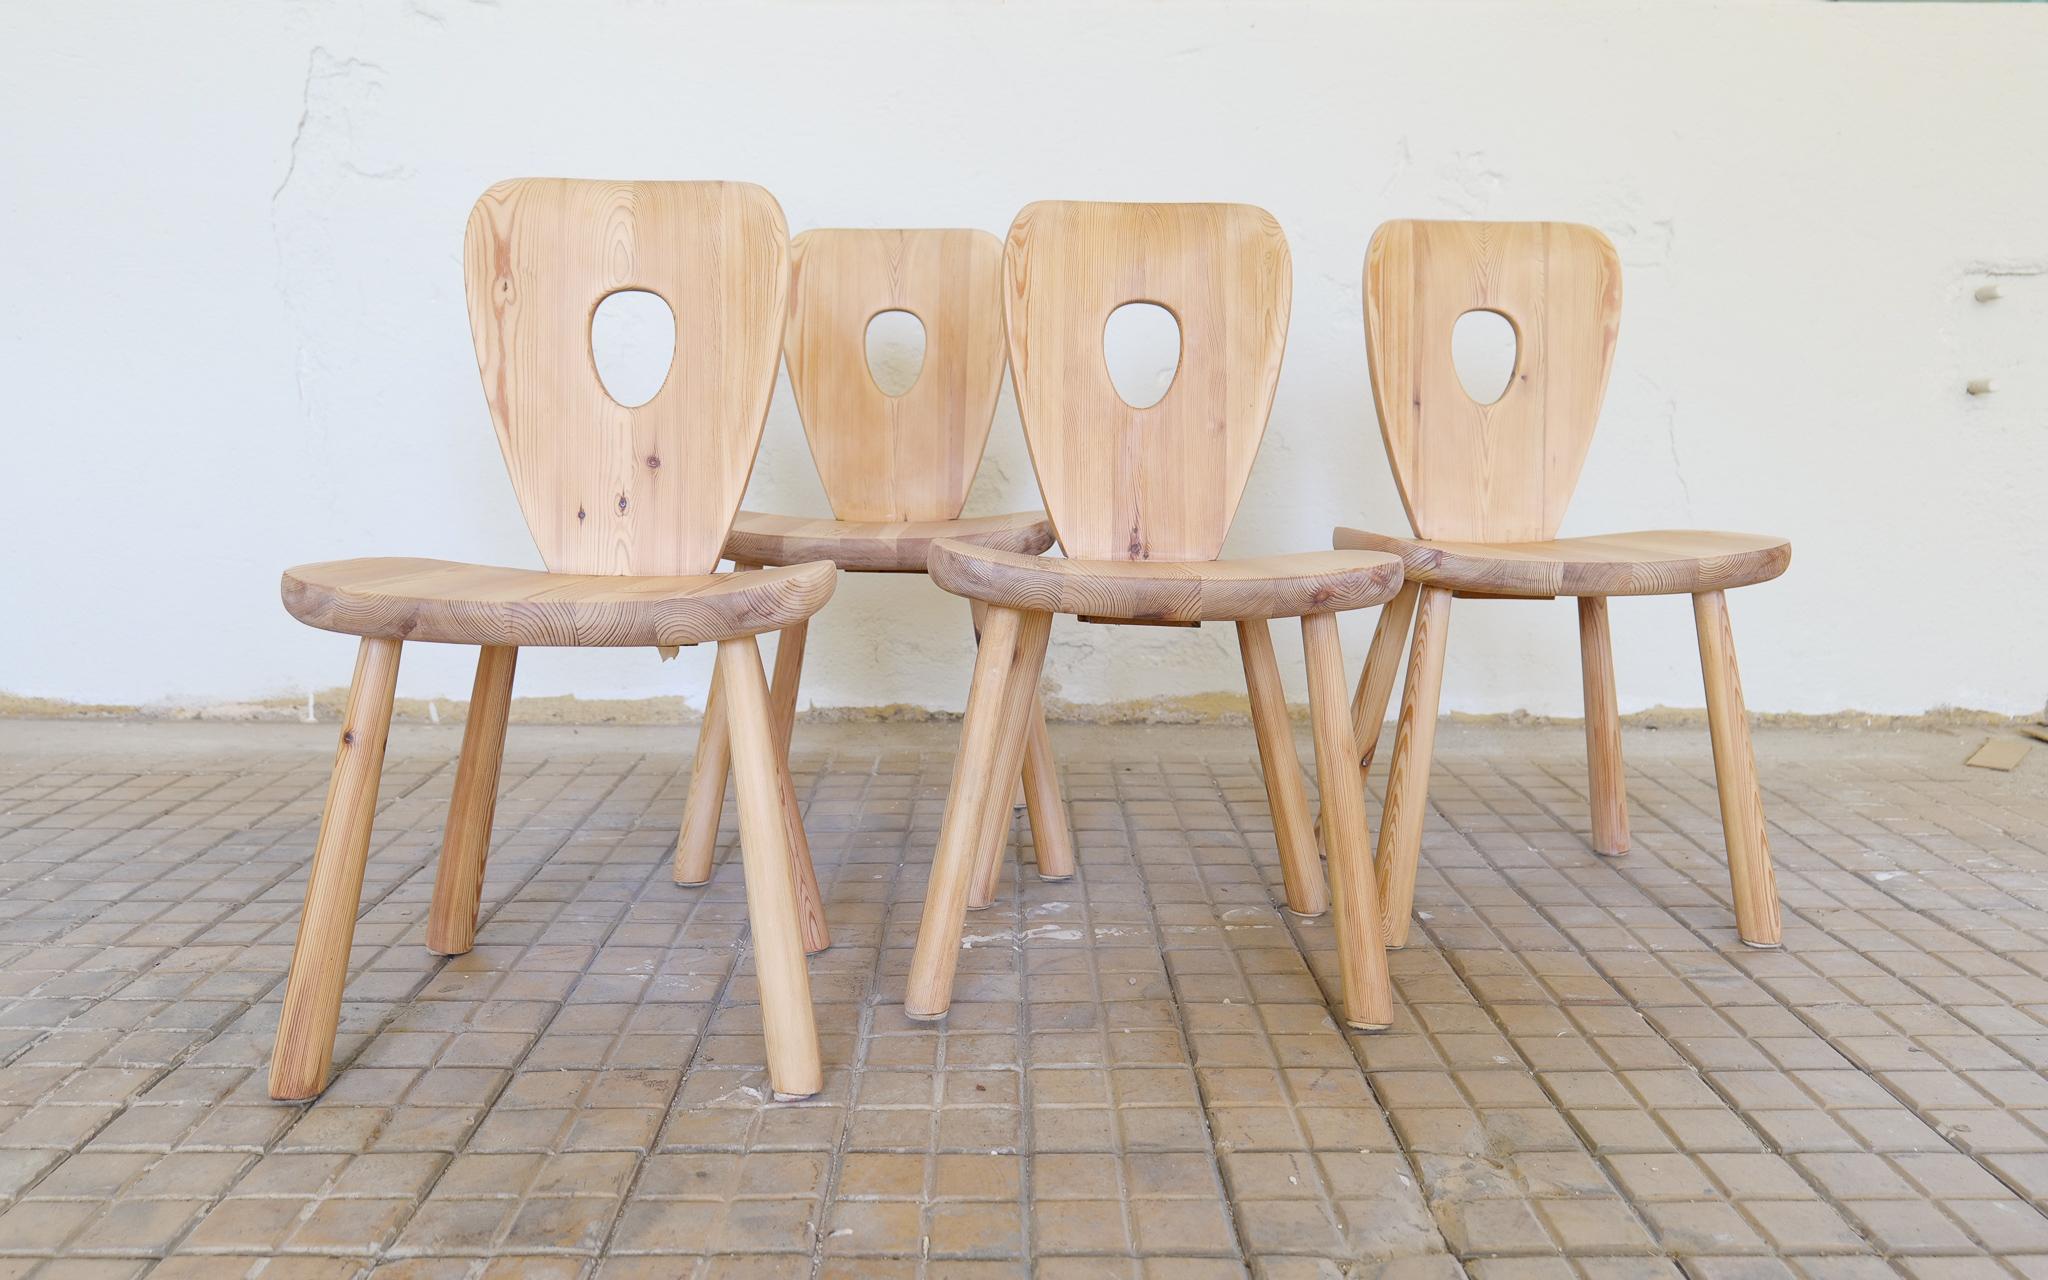 Swedish Sculptural Dining Chairs in Pine Bo Fjaestad, Sweden 1930s For Sale 1